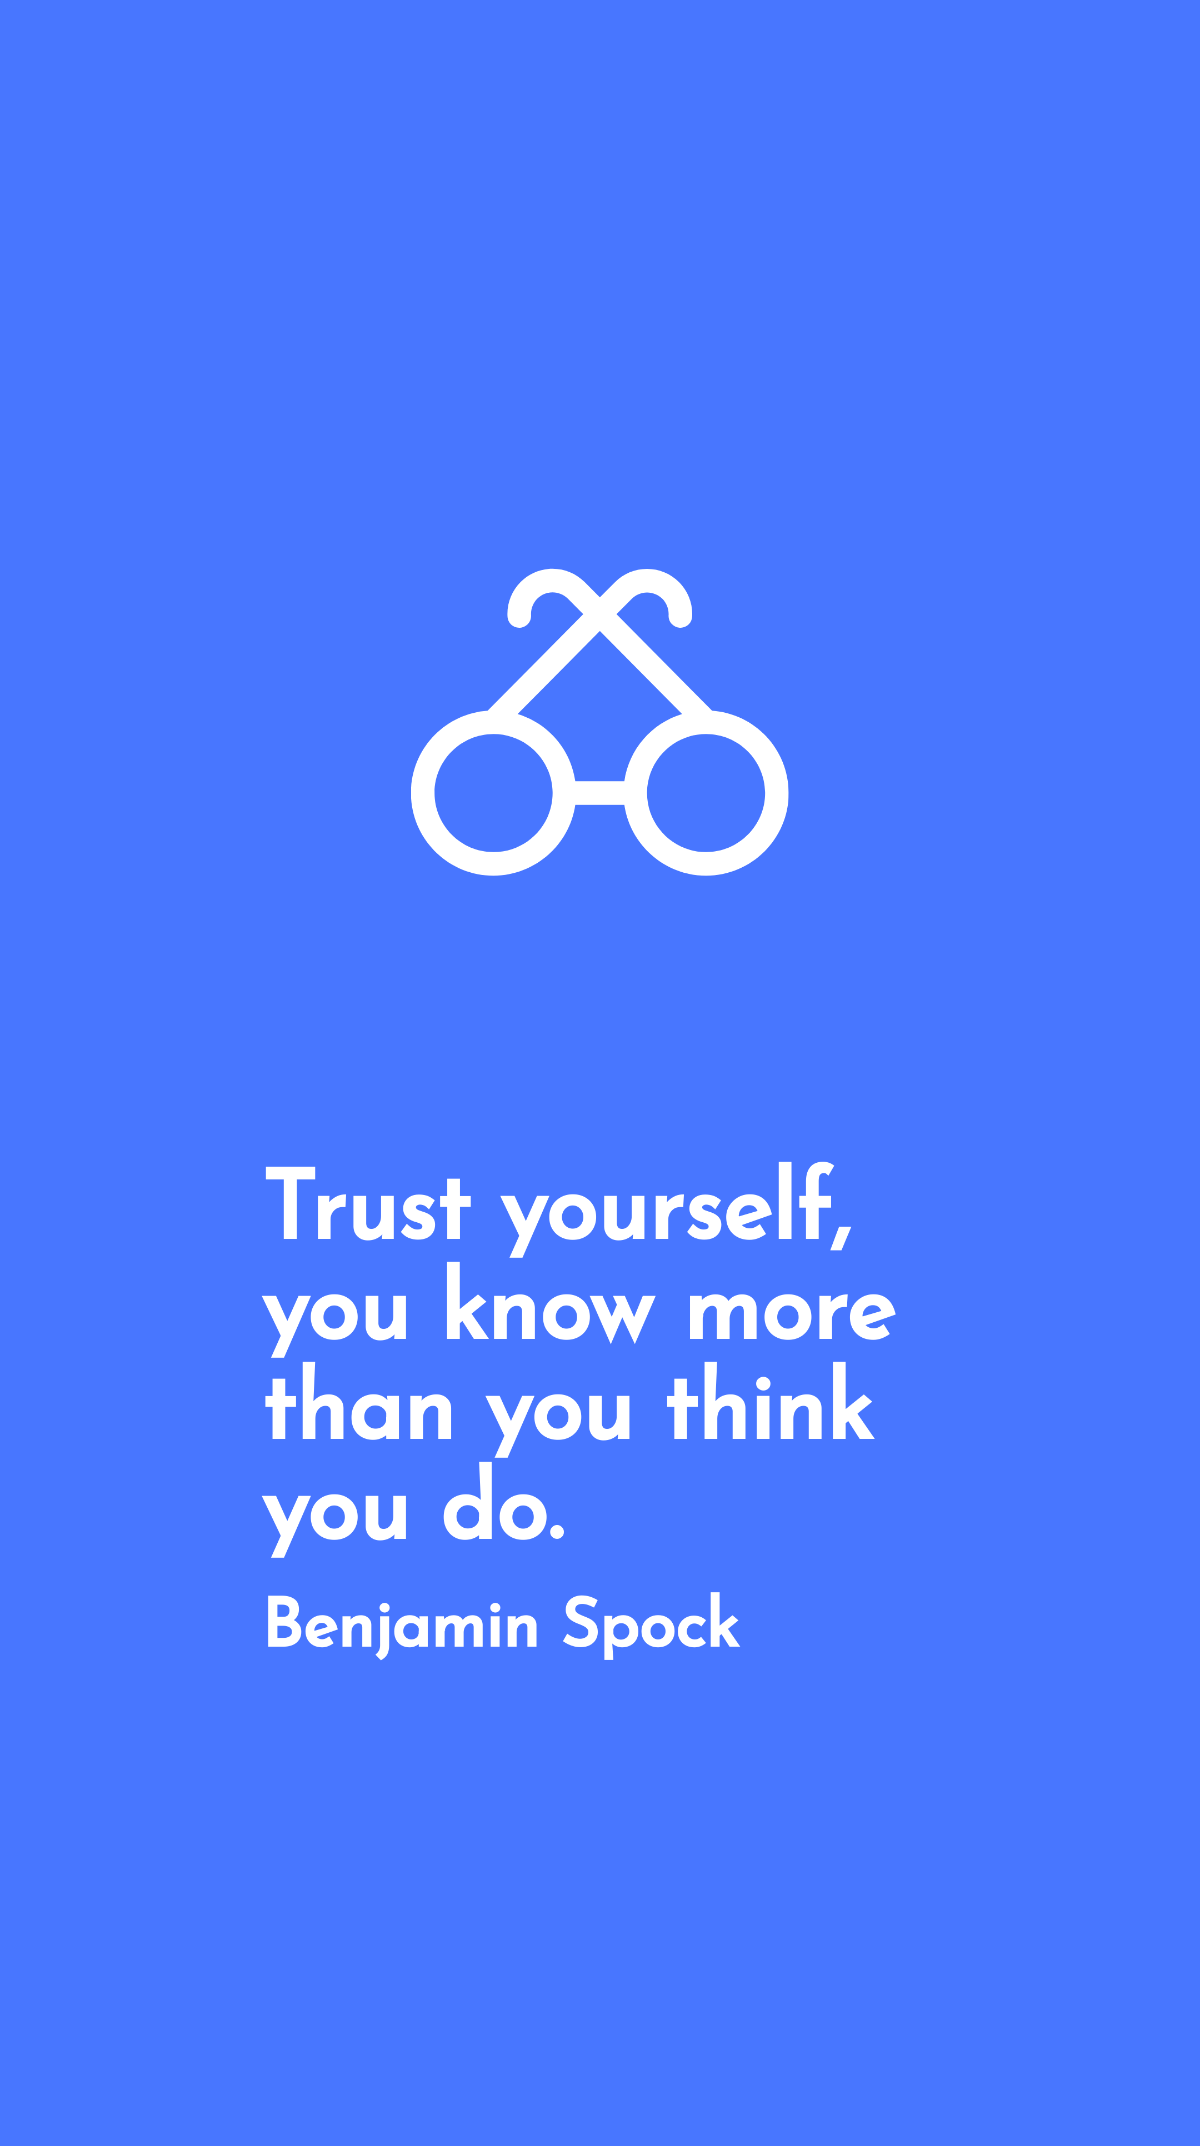 Benjamin Spock - Trust yourself, you know more than you think you do. Template